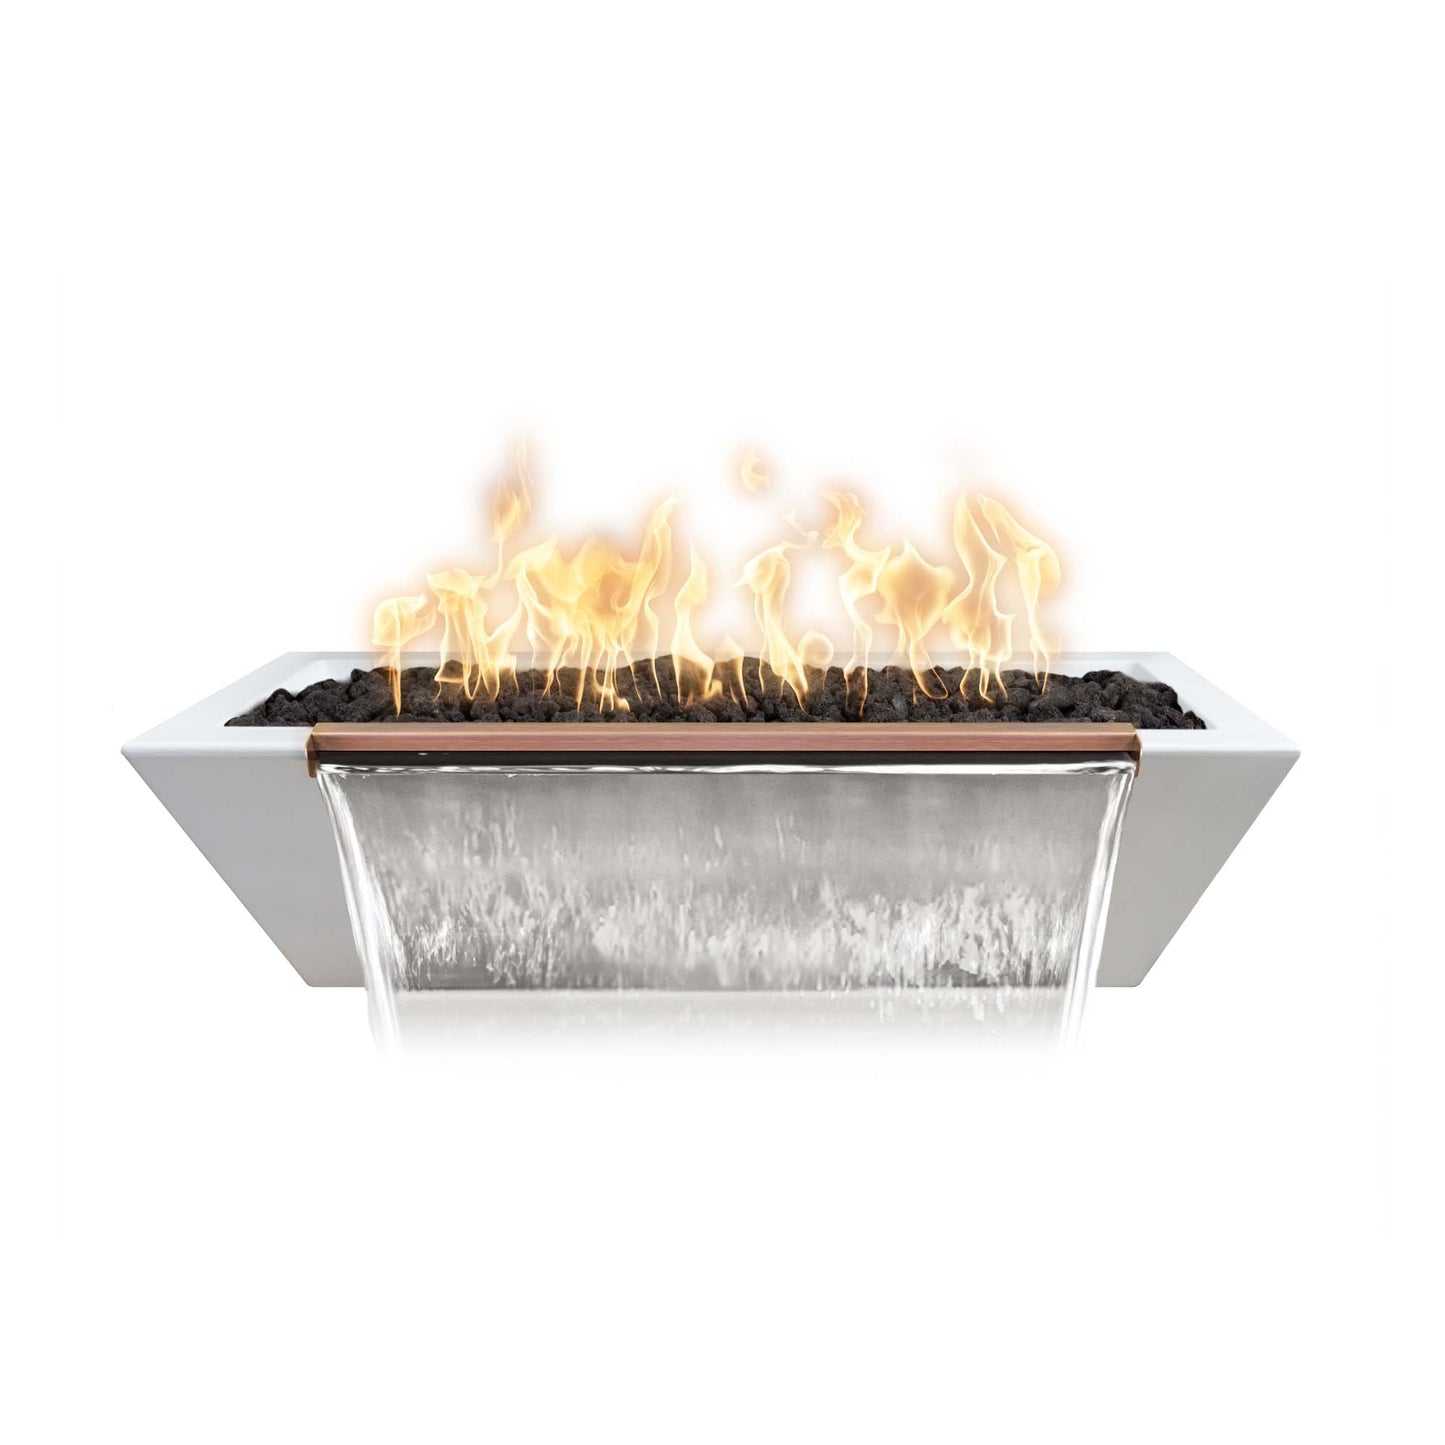 The Outdoor Plus Linear Maya 48" Rustic Gray GFRC Concrete Natural Gas Fire & Water Bowl with Match Lit with Flame Sense Ignition